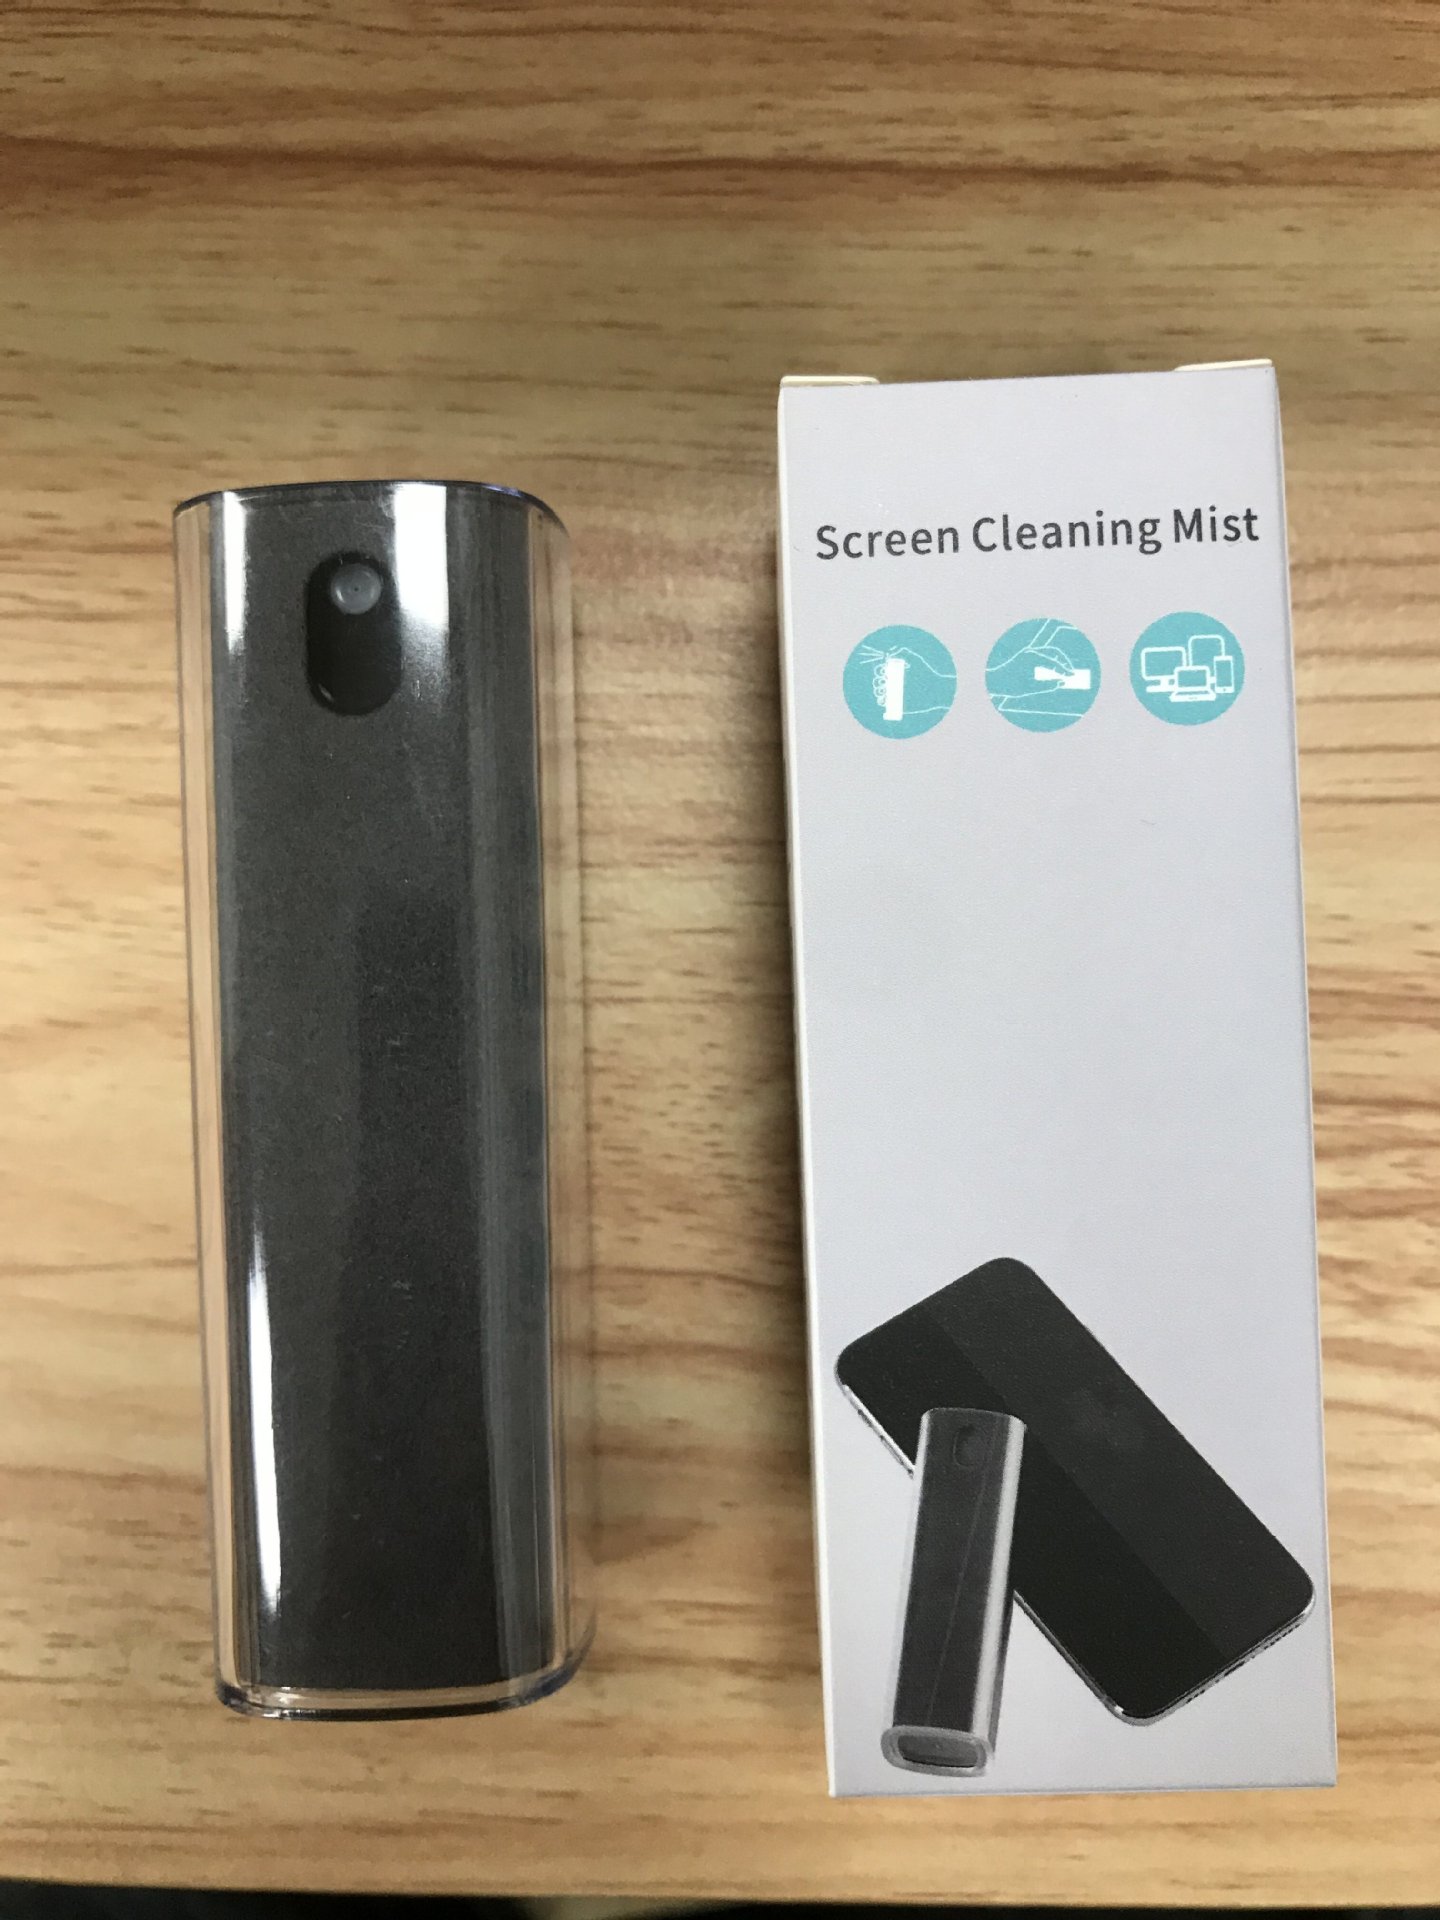 Screen Cleaner Touchscreen Mist Spray-Topselling